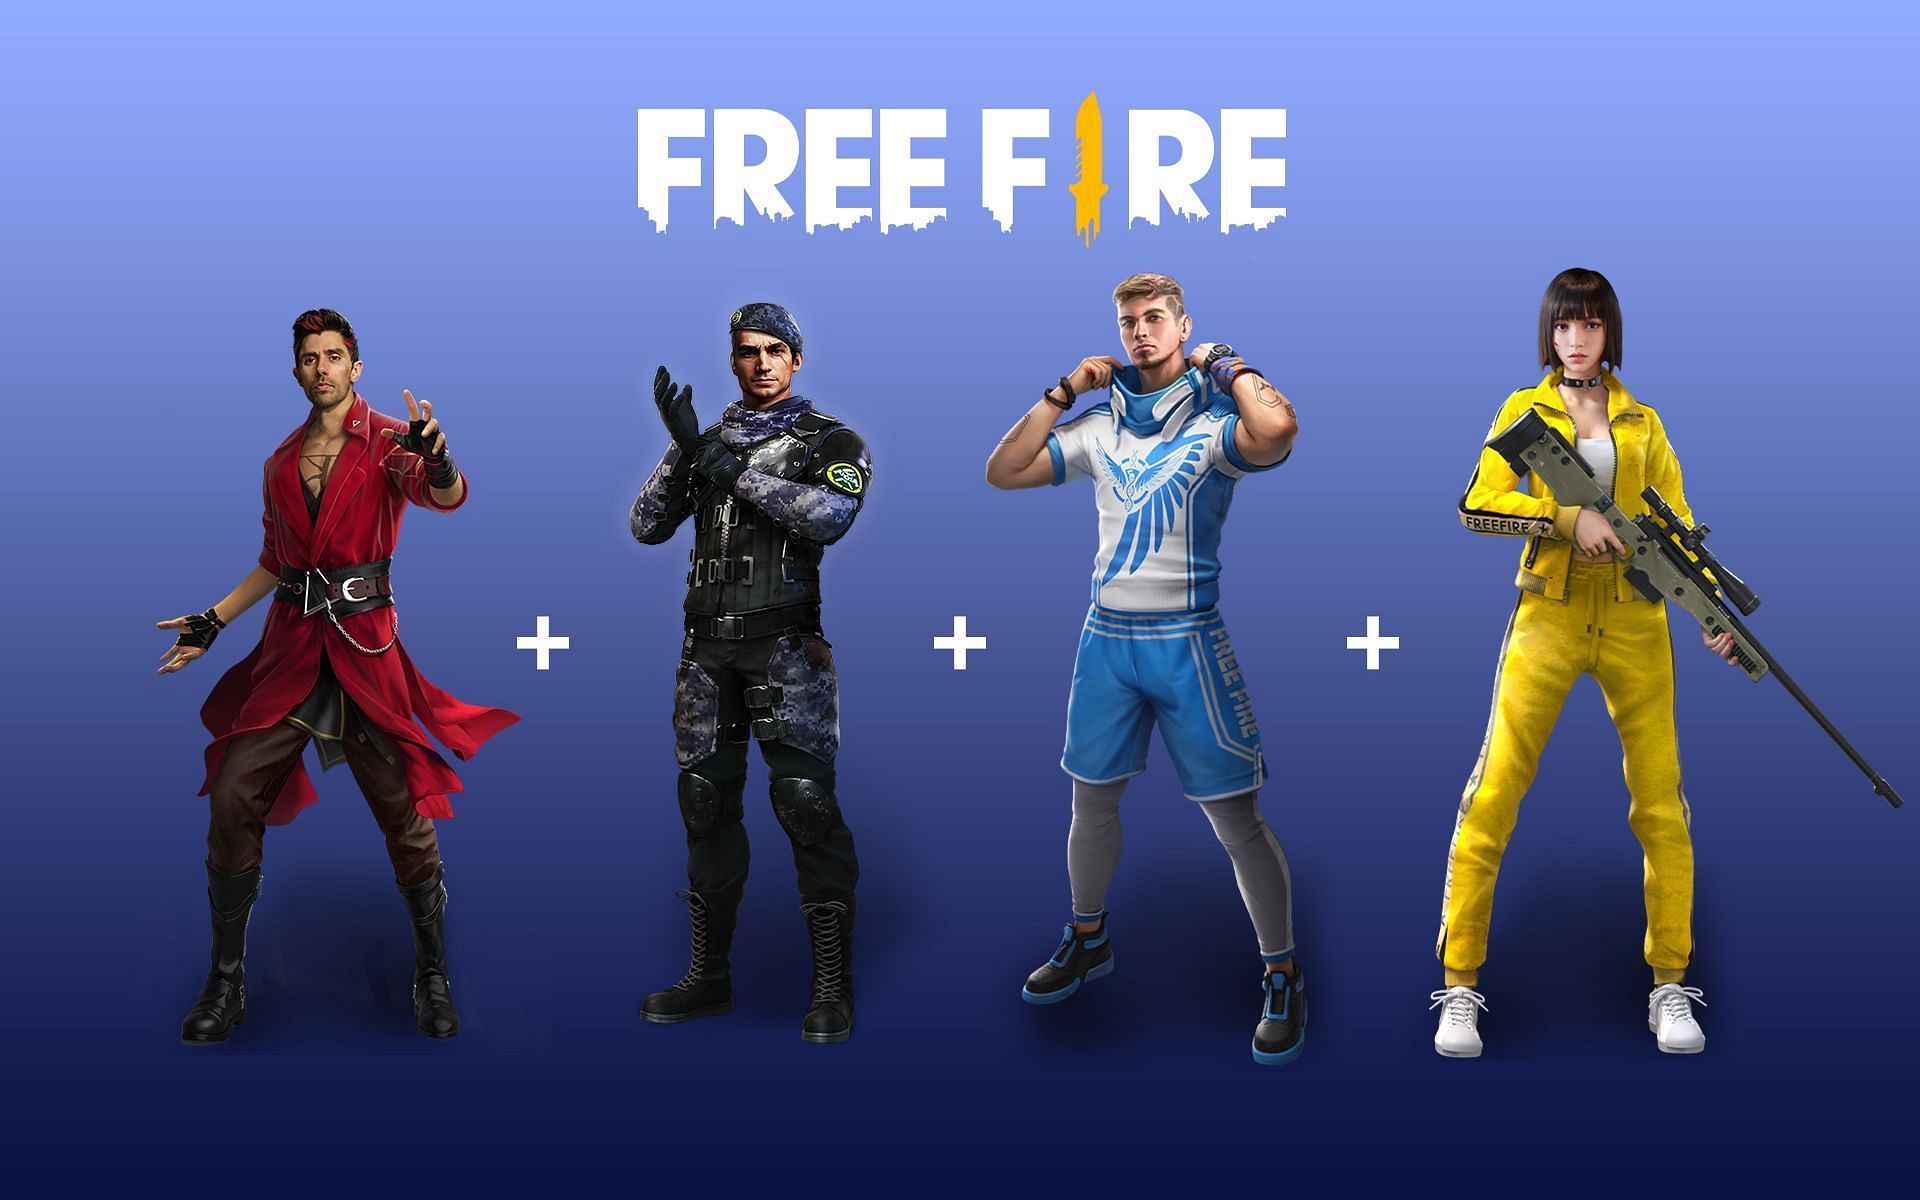 Character combinations can be created in Free Fire (Image via Sportstkeeda)